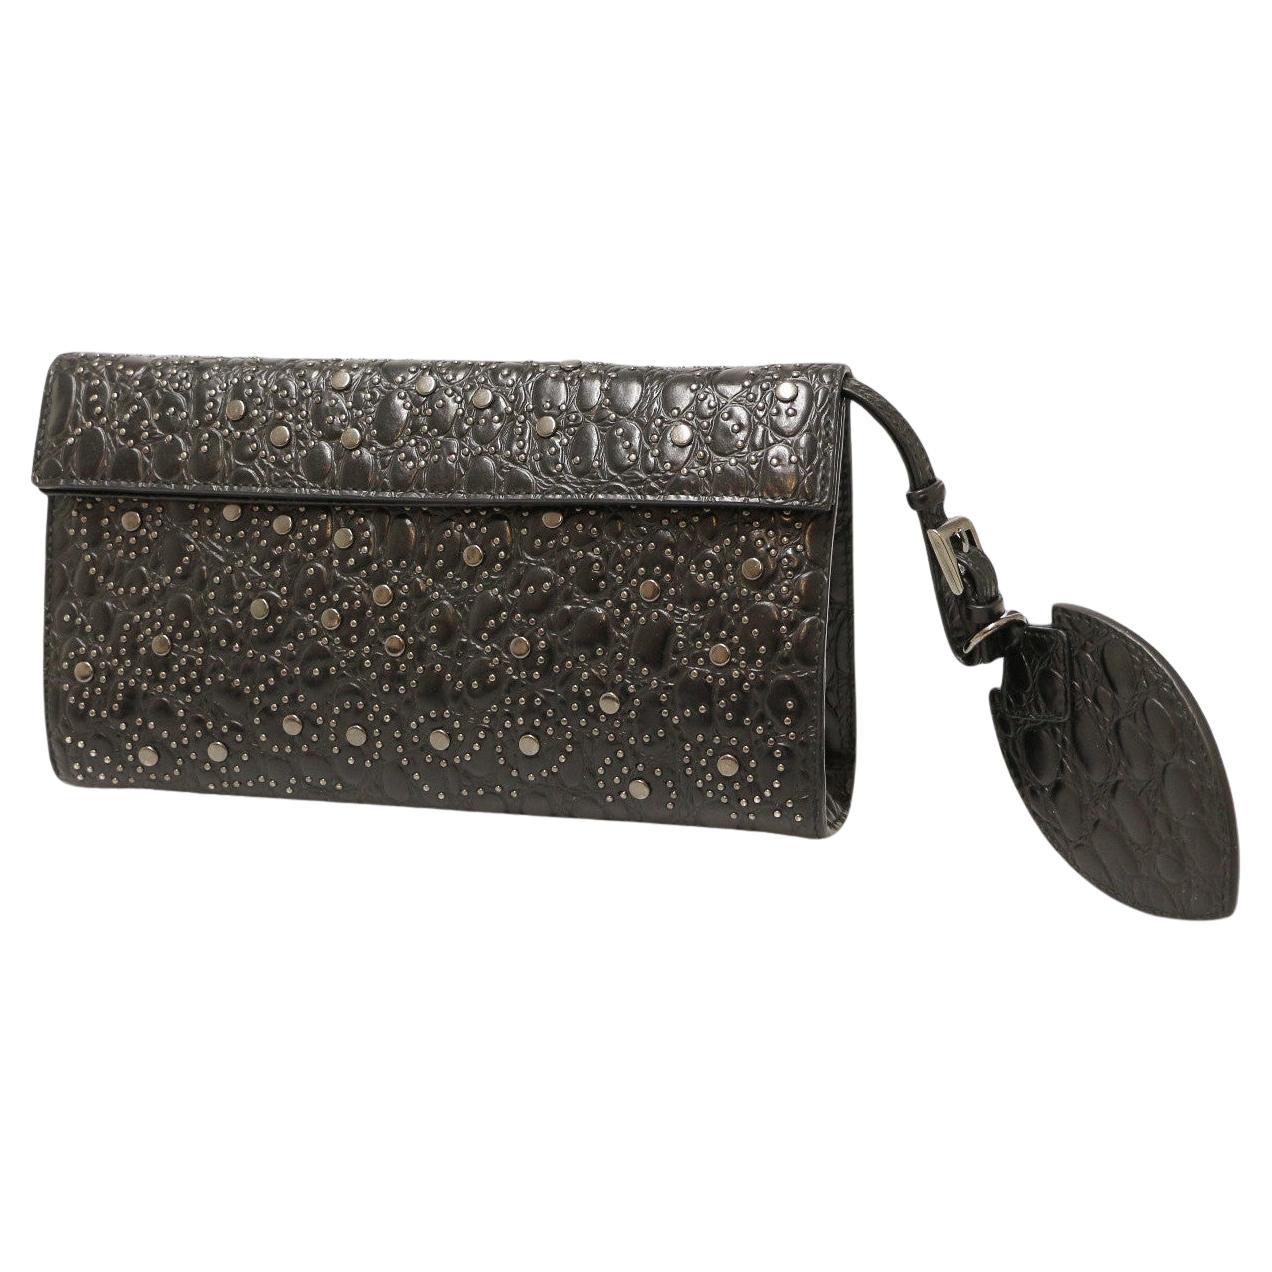 Alaia Studded Black Leather Clutch For Sale